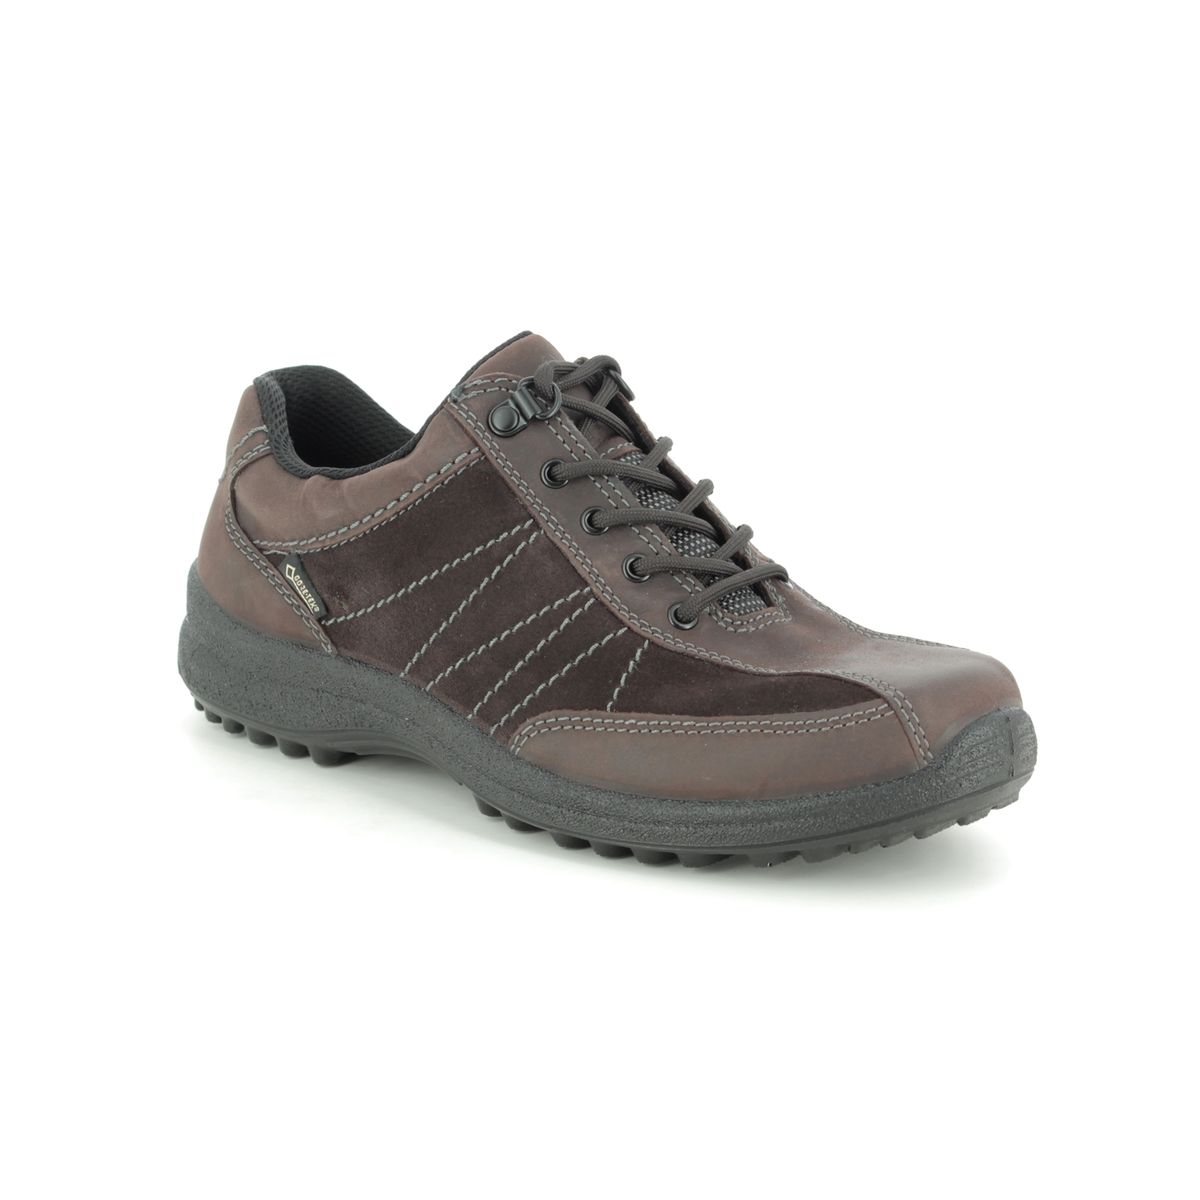 hotter gore tex walking shoes